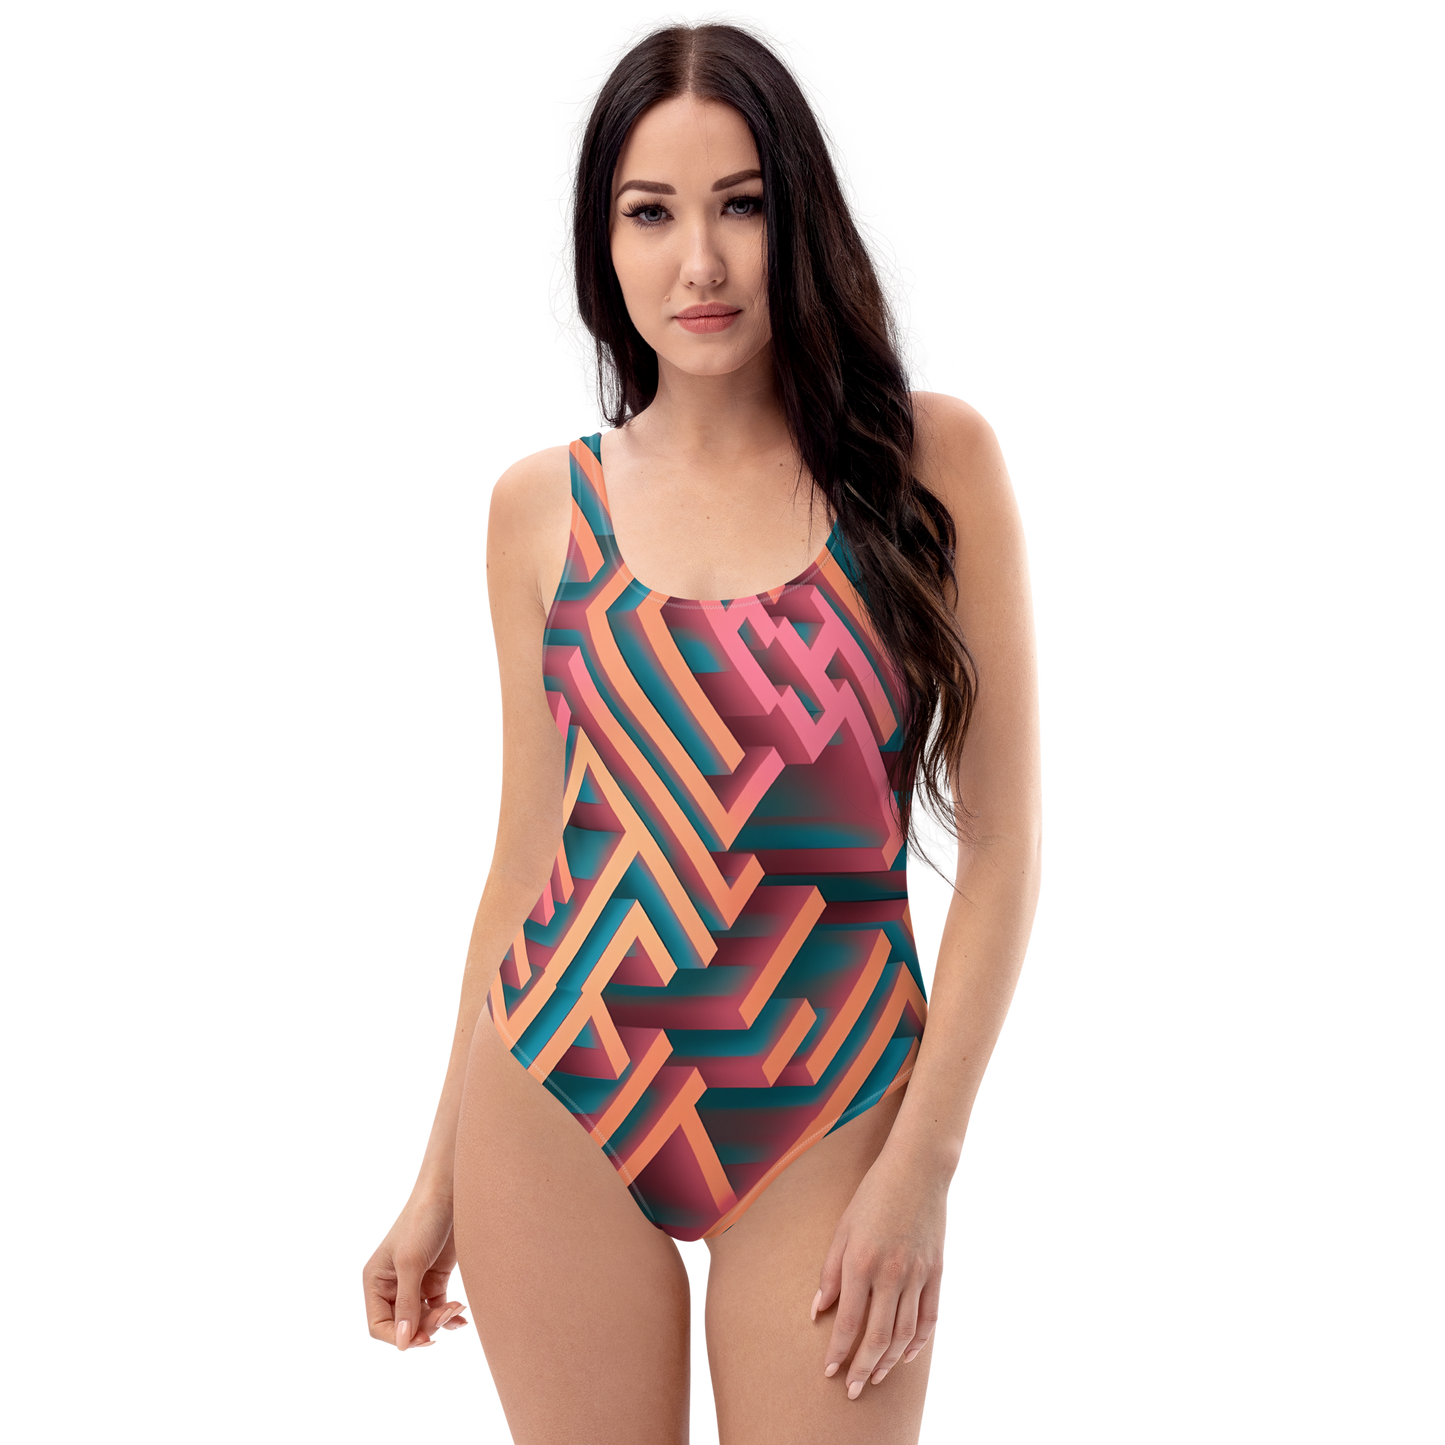 3D Maze Illusion | 3D Patterns | All-Over Print One-Piece Swimsuit - #1